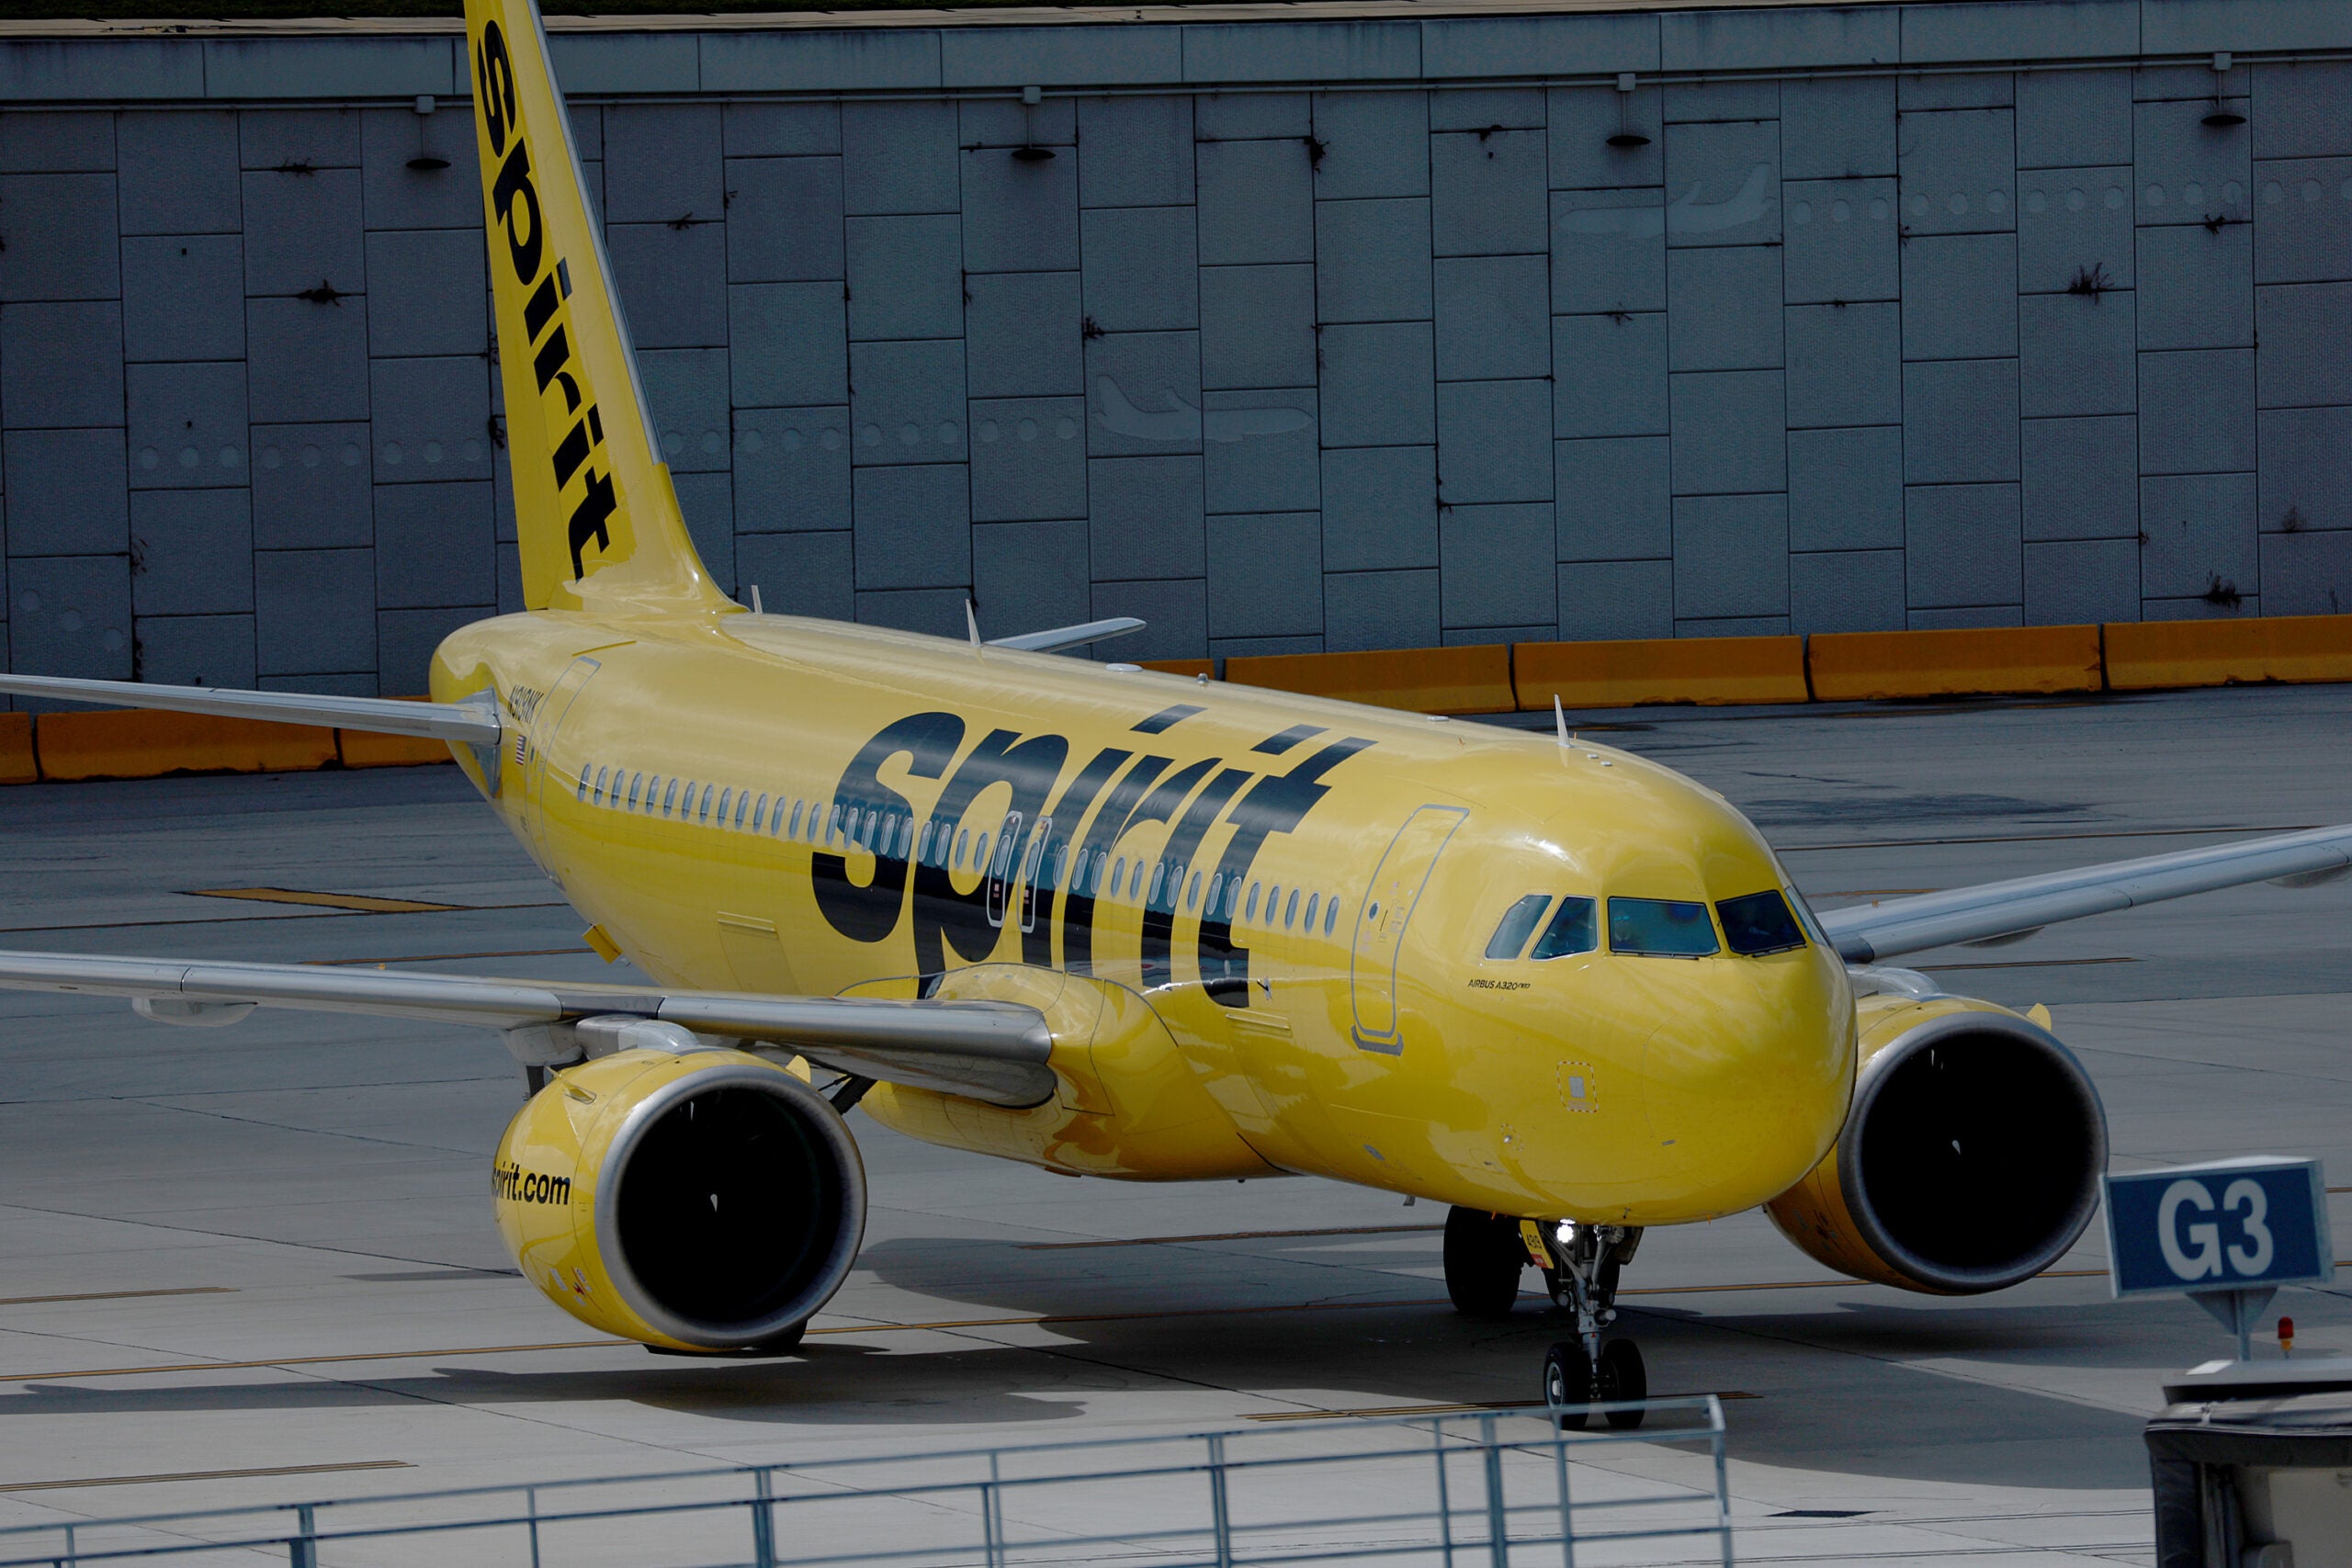 Spirit And Frontier Airlines Merge In $6.6 Billion Deal